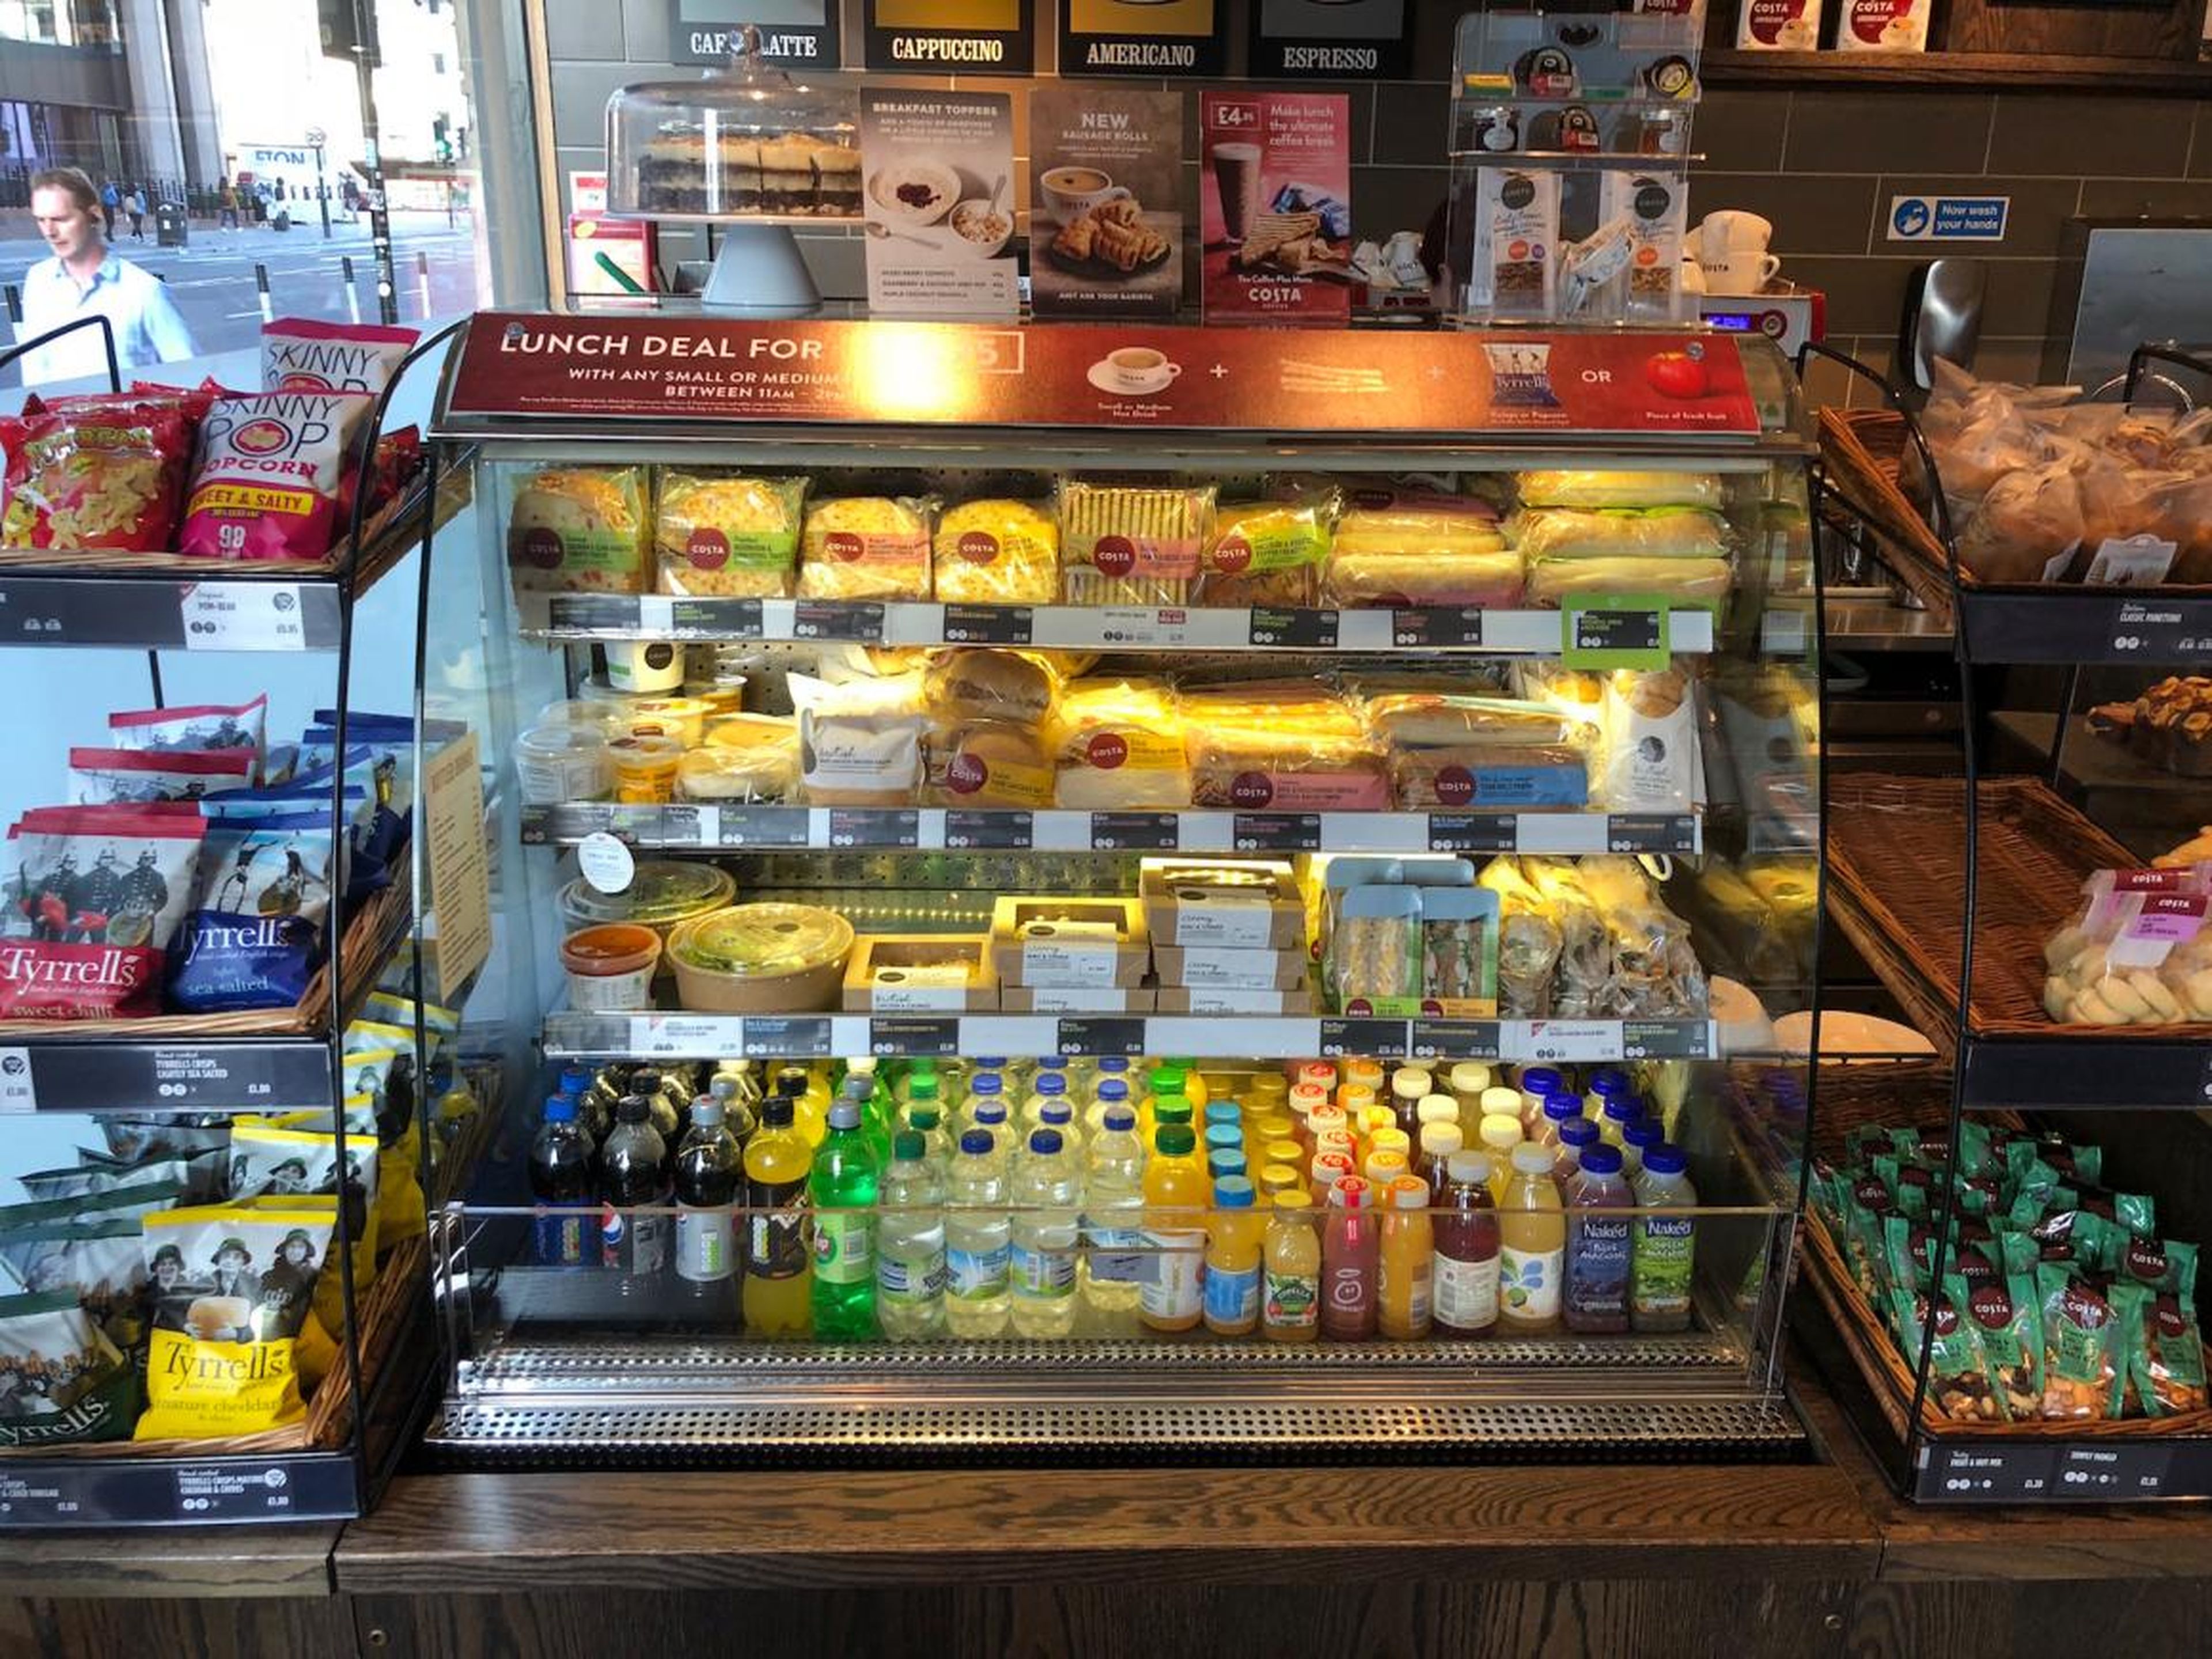 Costa offers a range of food along with its coffees, including paninis, wraps, and salads. Customers can also buy snacks like crisps and nuts, as well as cold drinks like orange juice and — ironically — Pepsi.